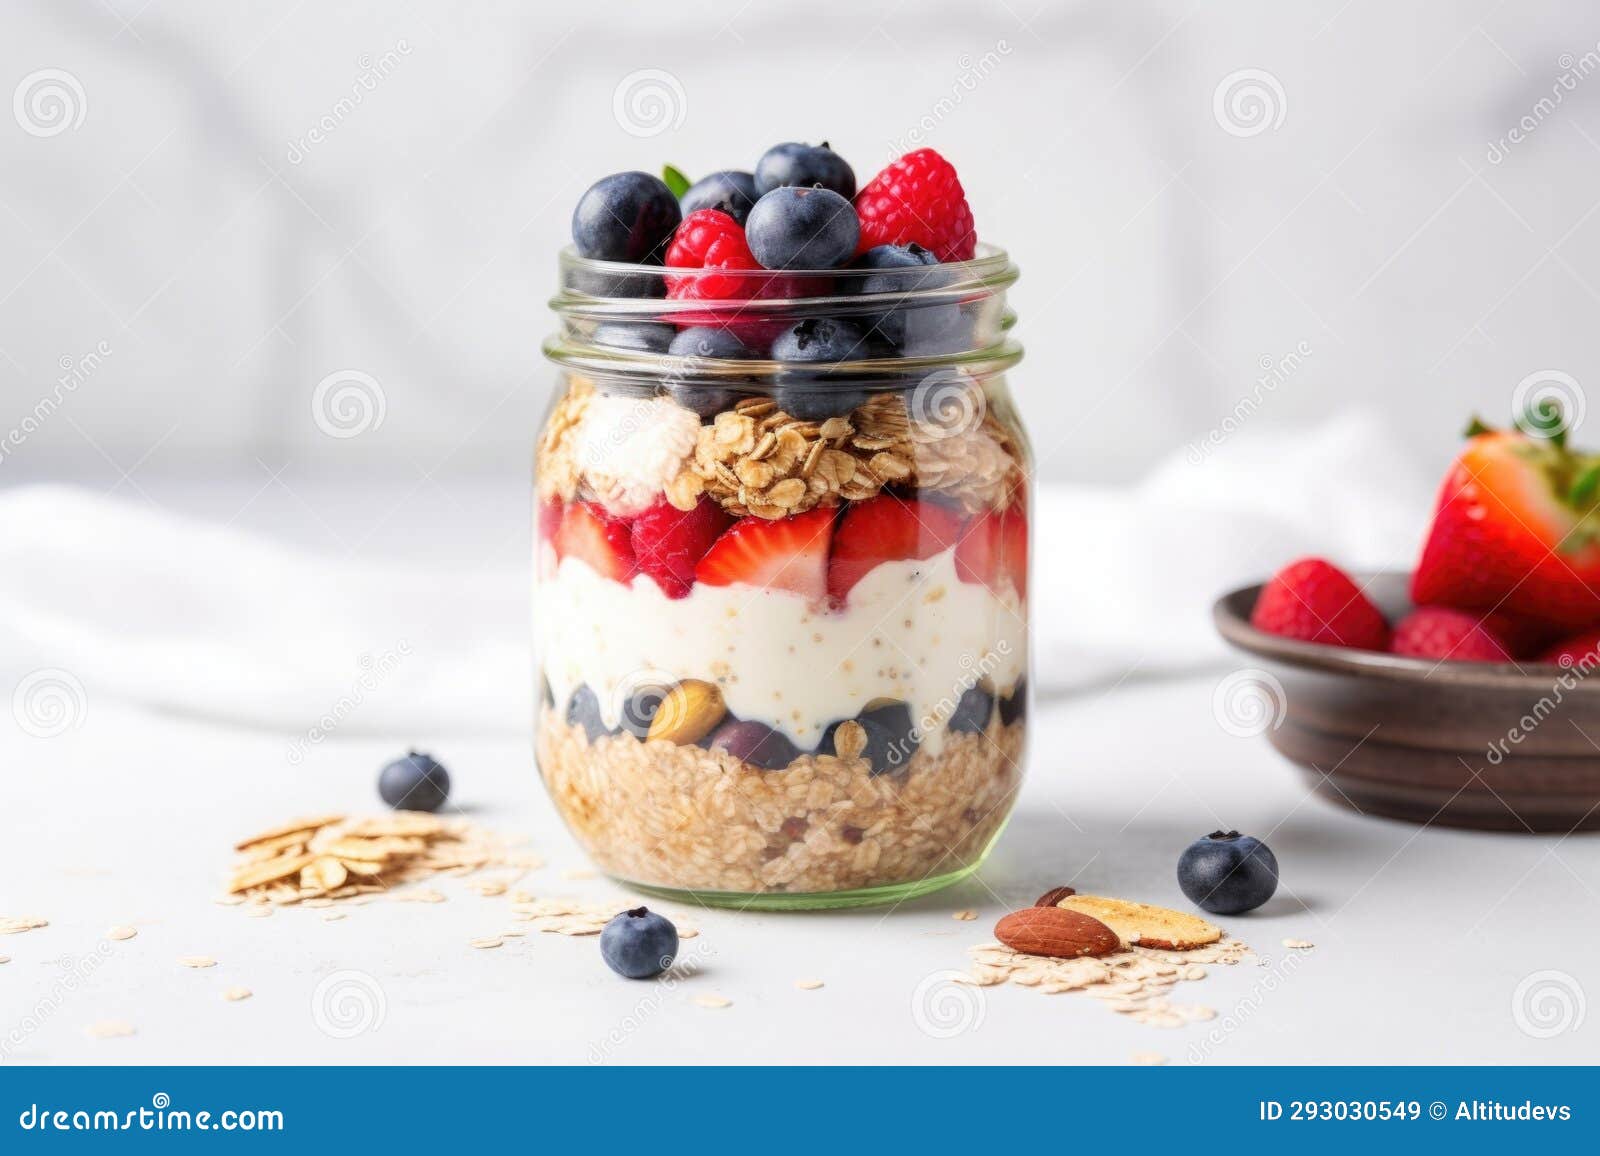 glass jar filled with overnight oats, berries, and nuts